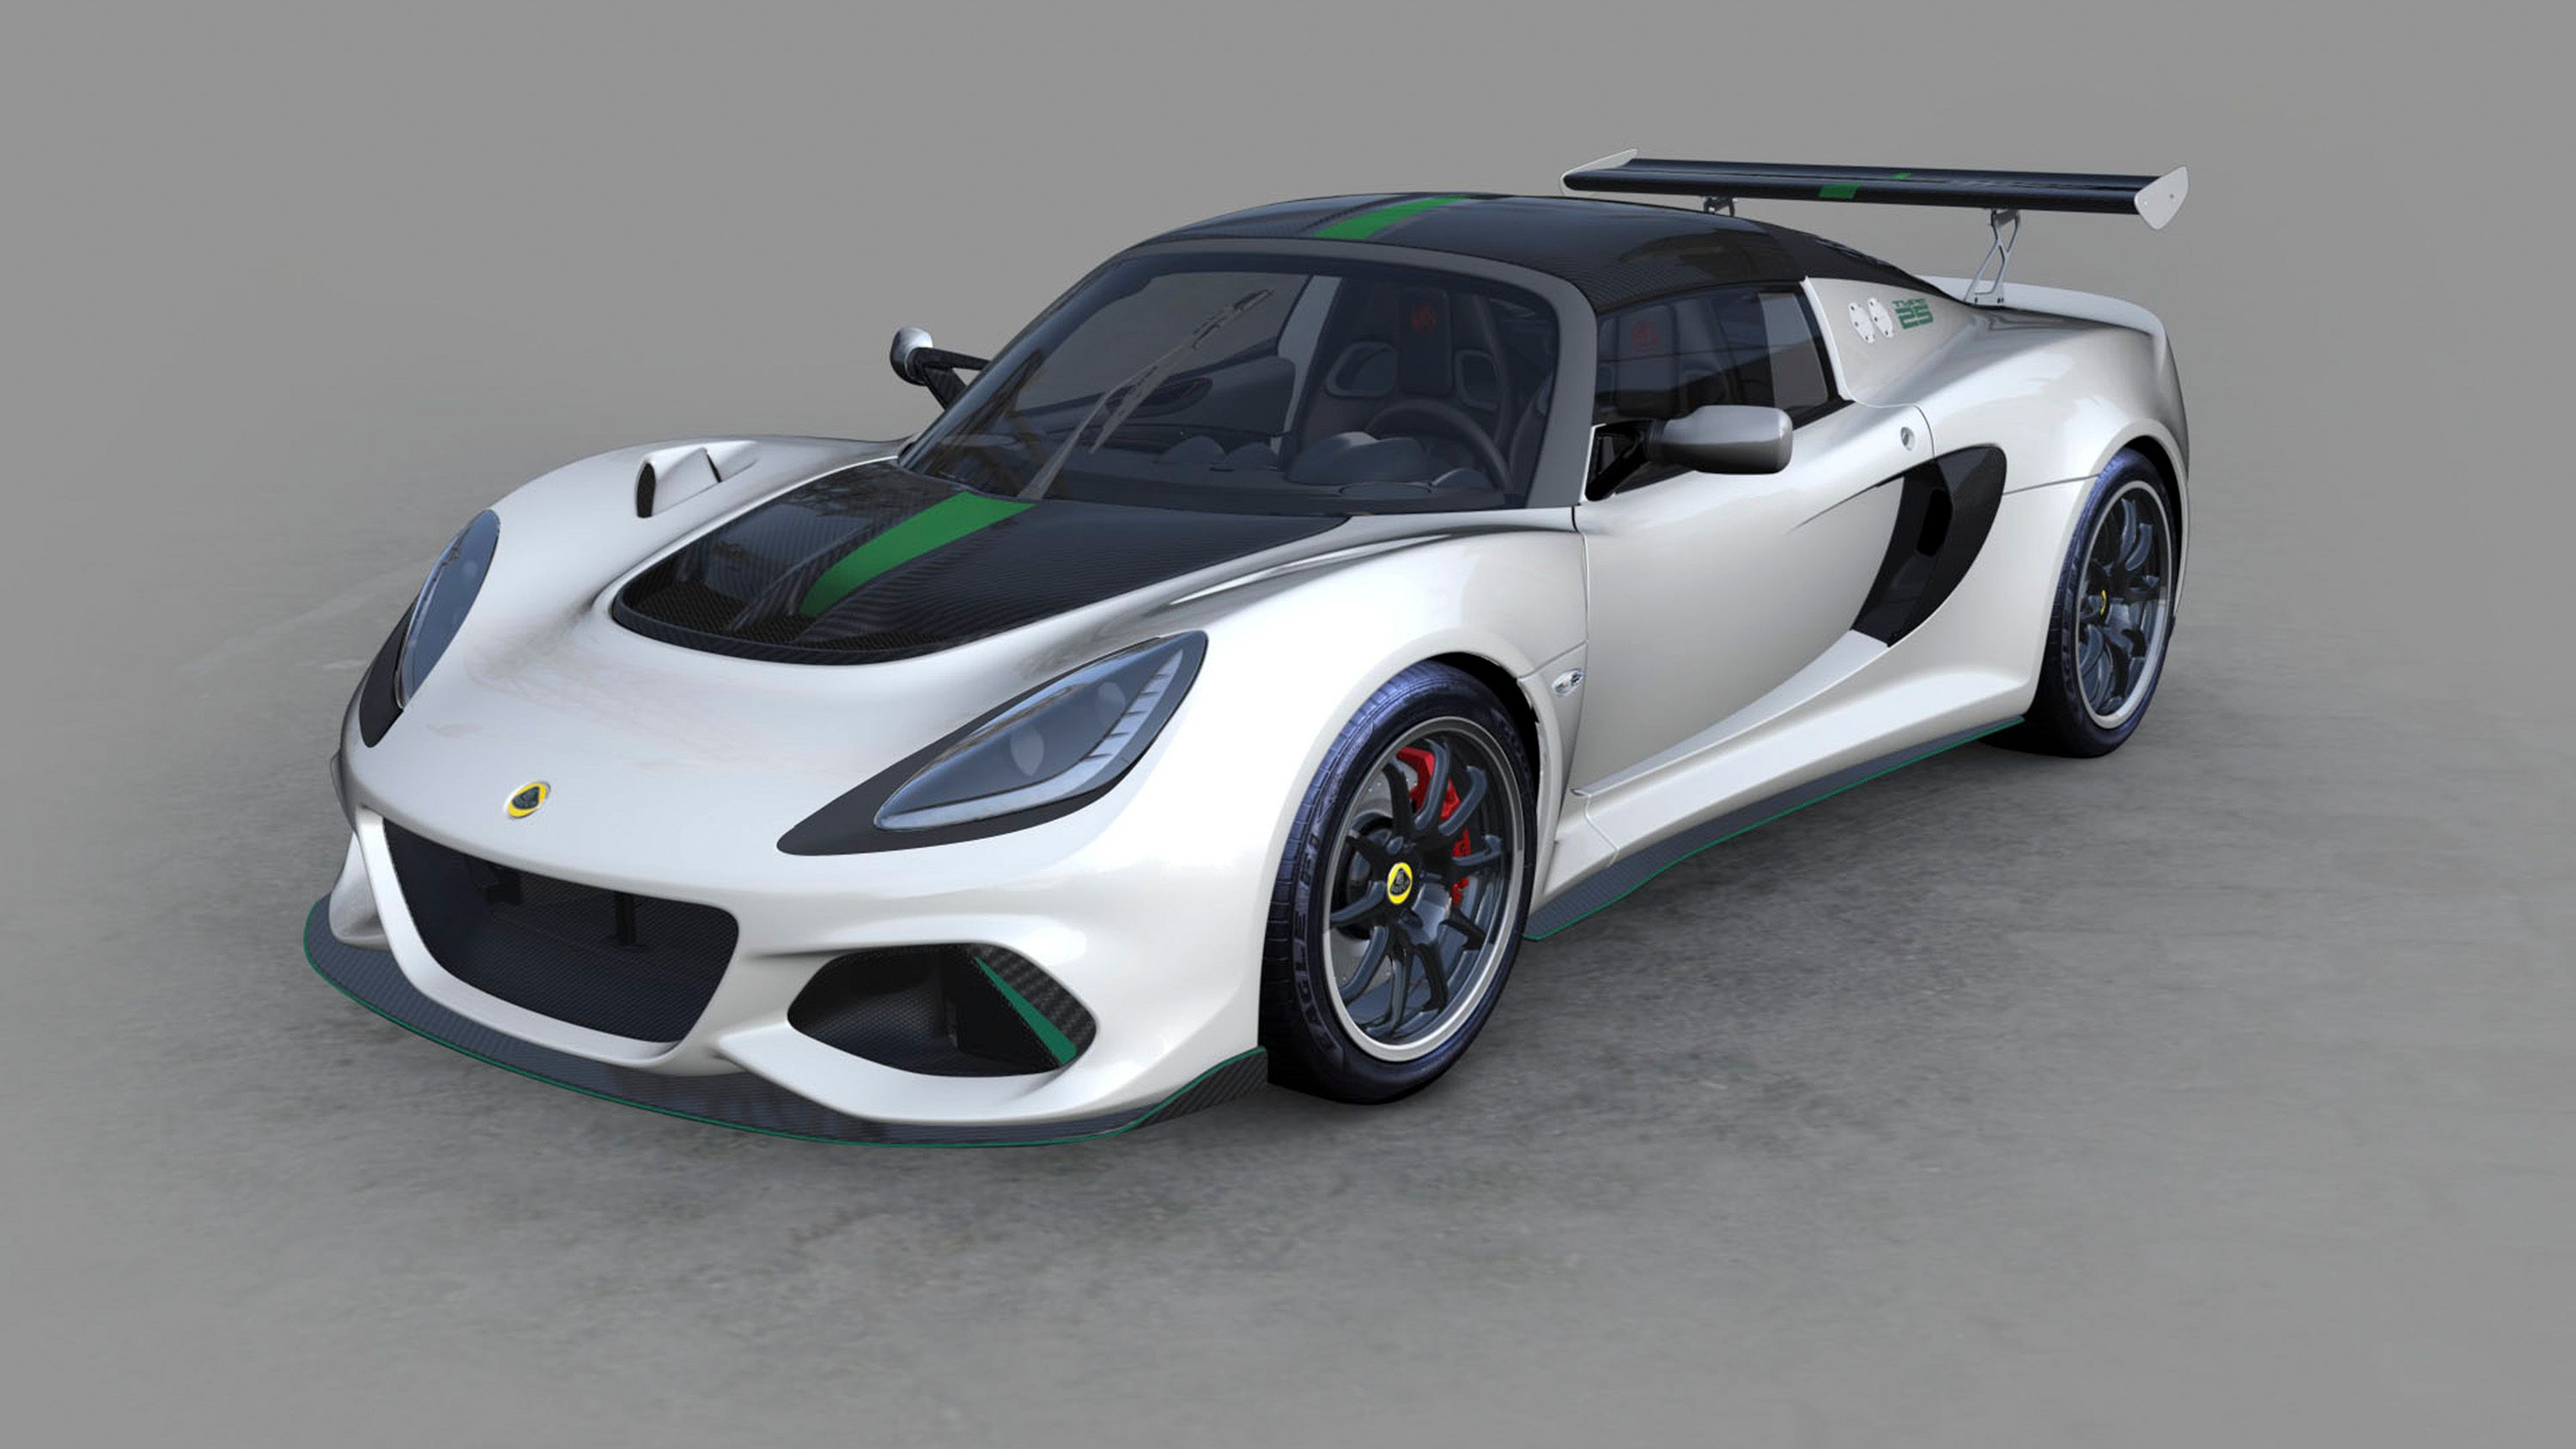 2018 Geely Wants Lotus To Start Playing With The Big Boys